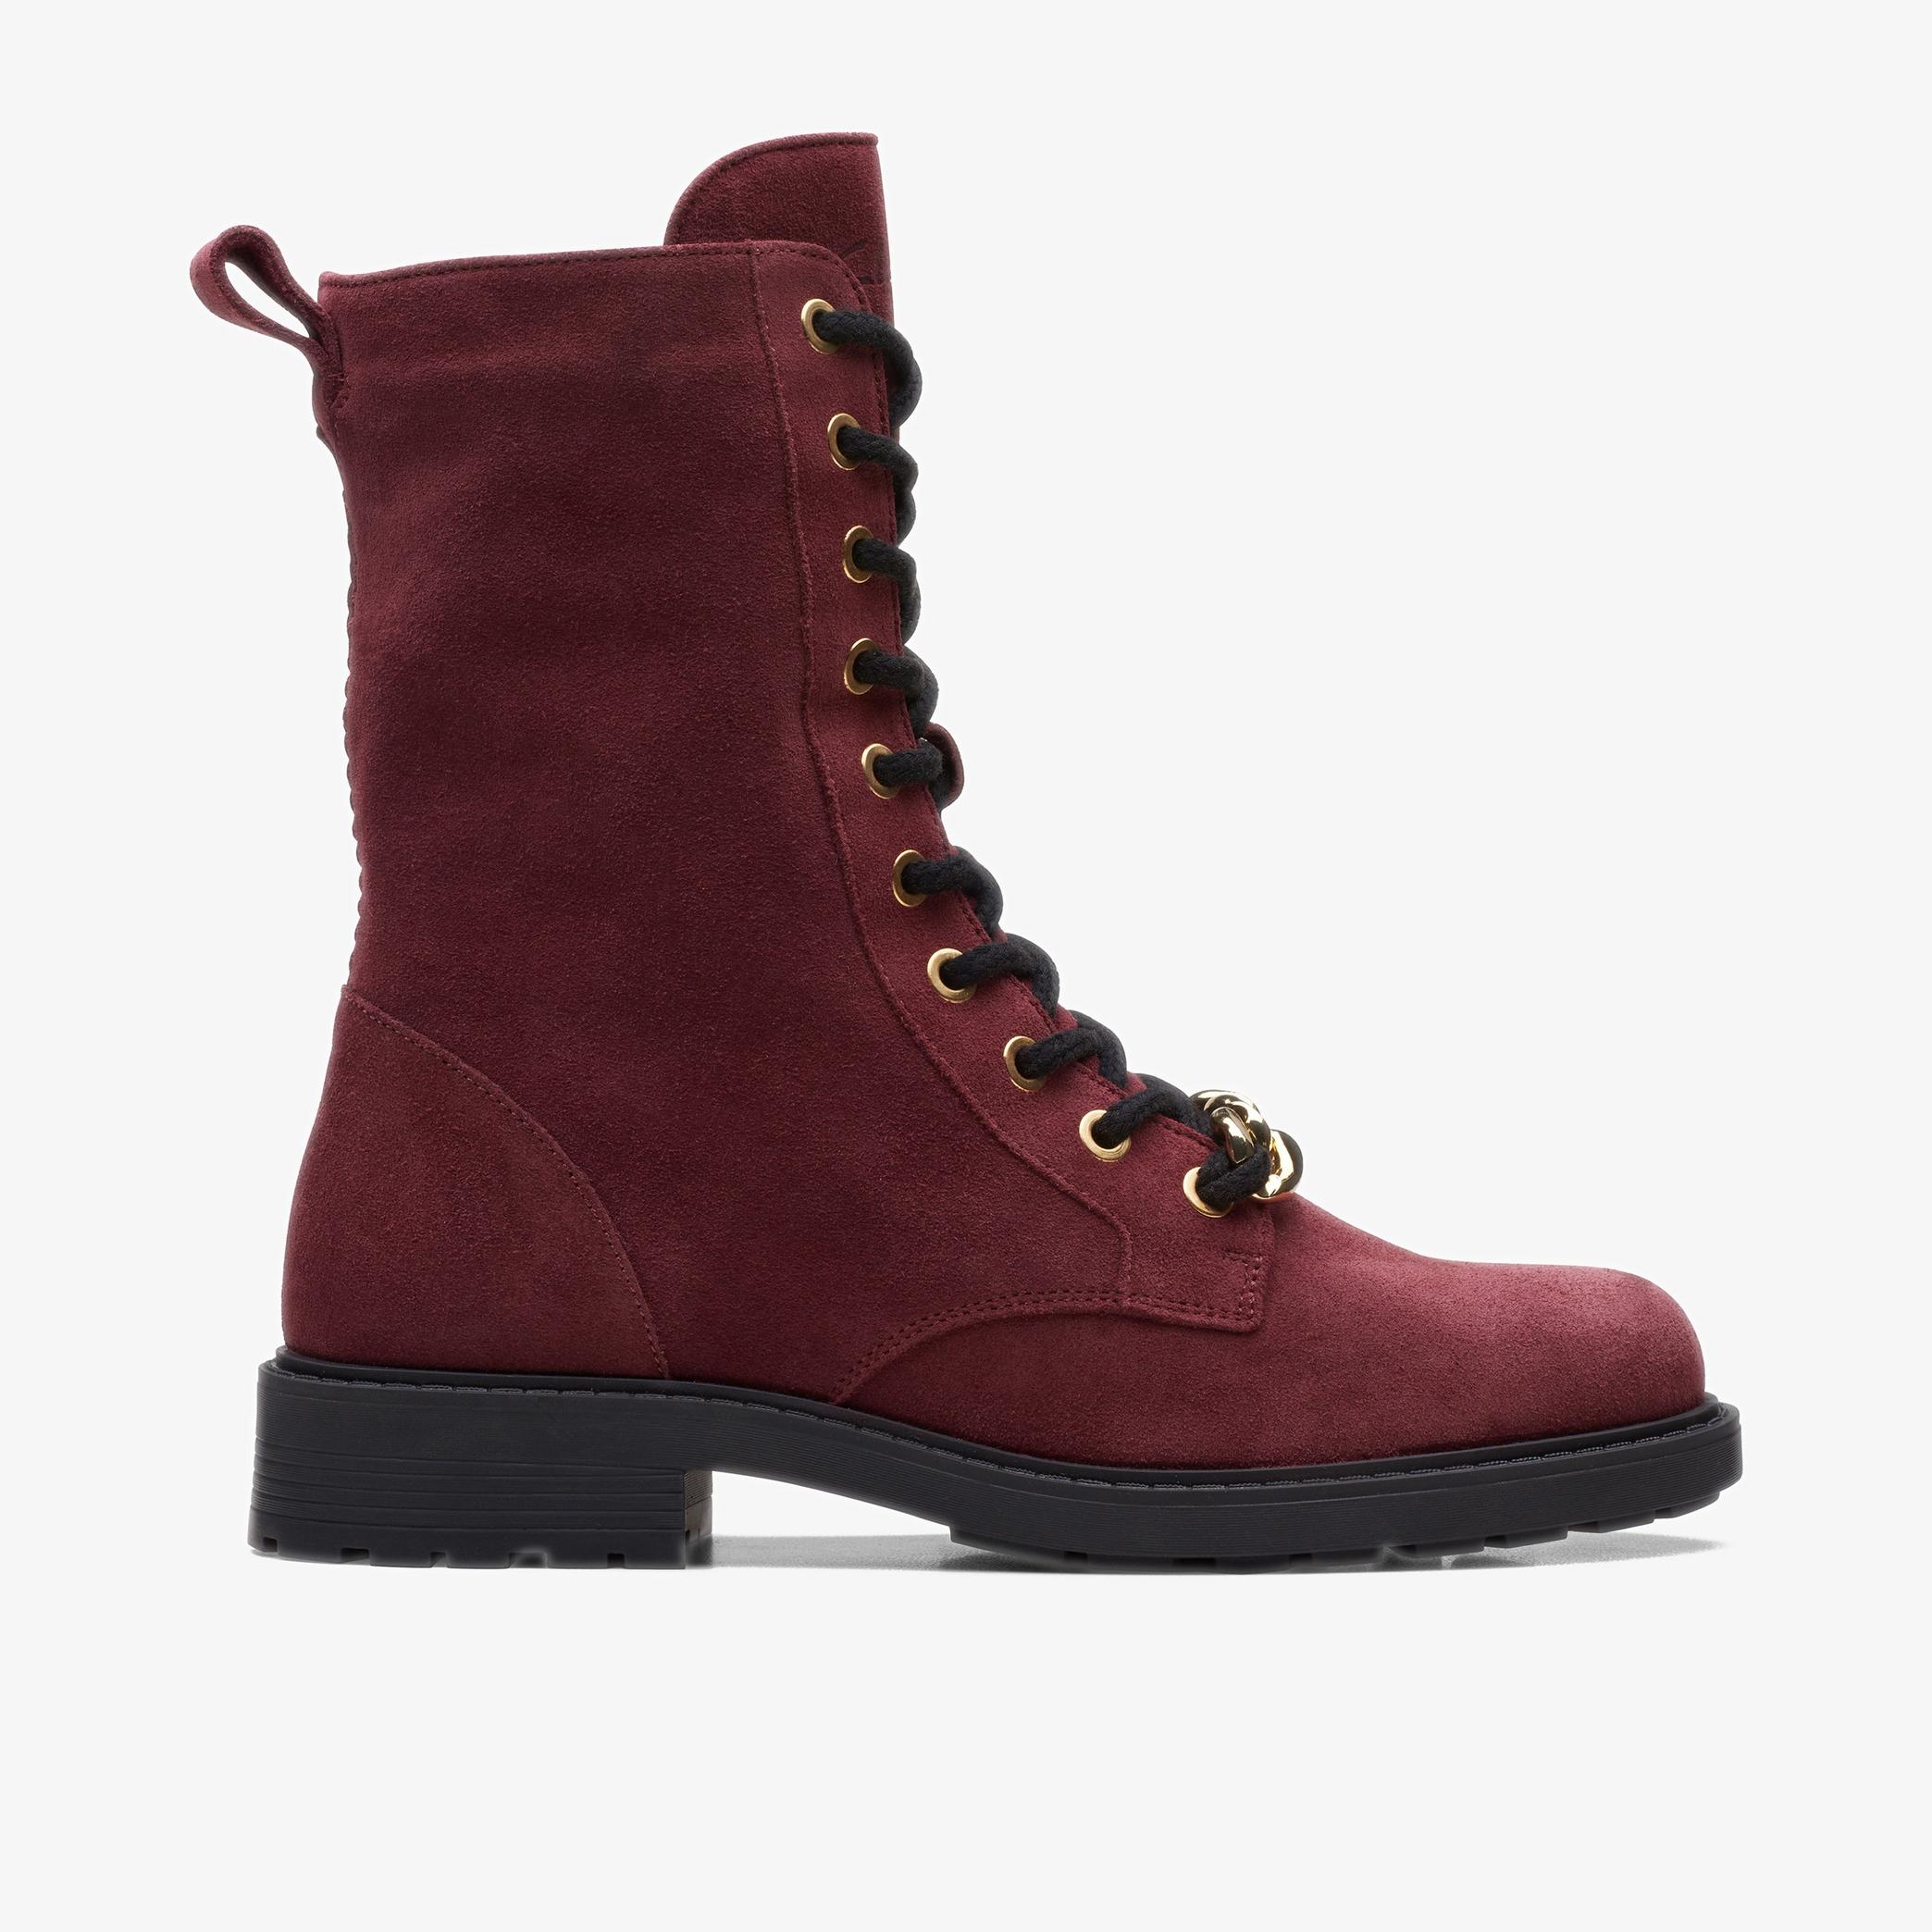 Orinoco2 Style Merlot Suede Ankle Boots, view 1 of 6